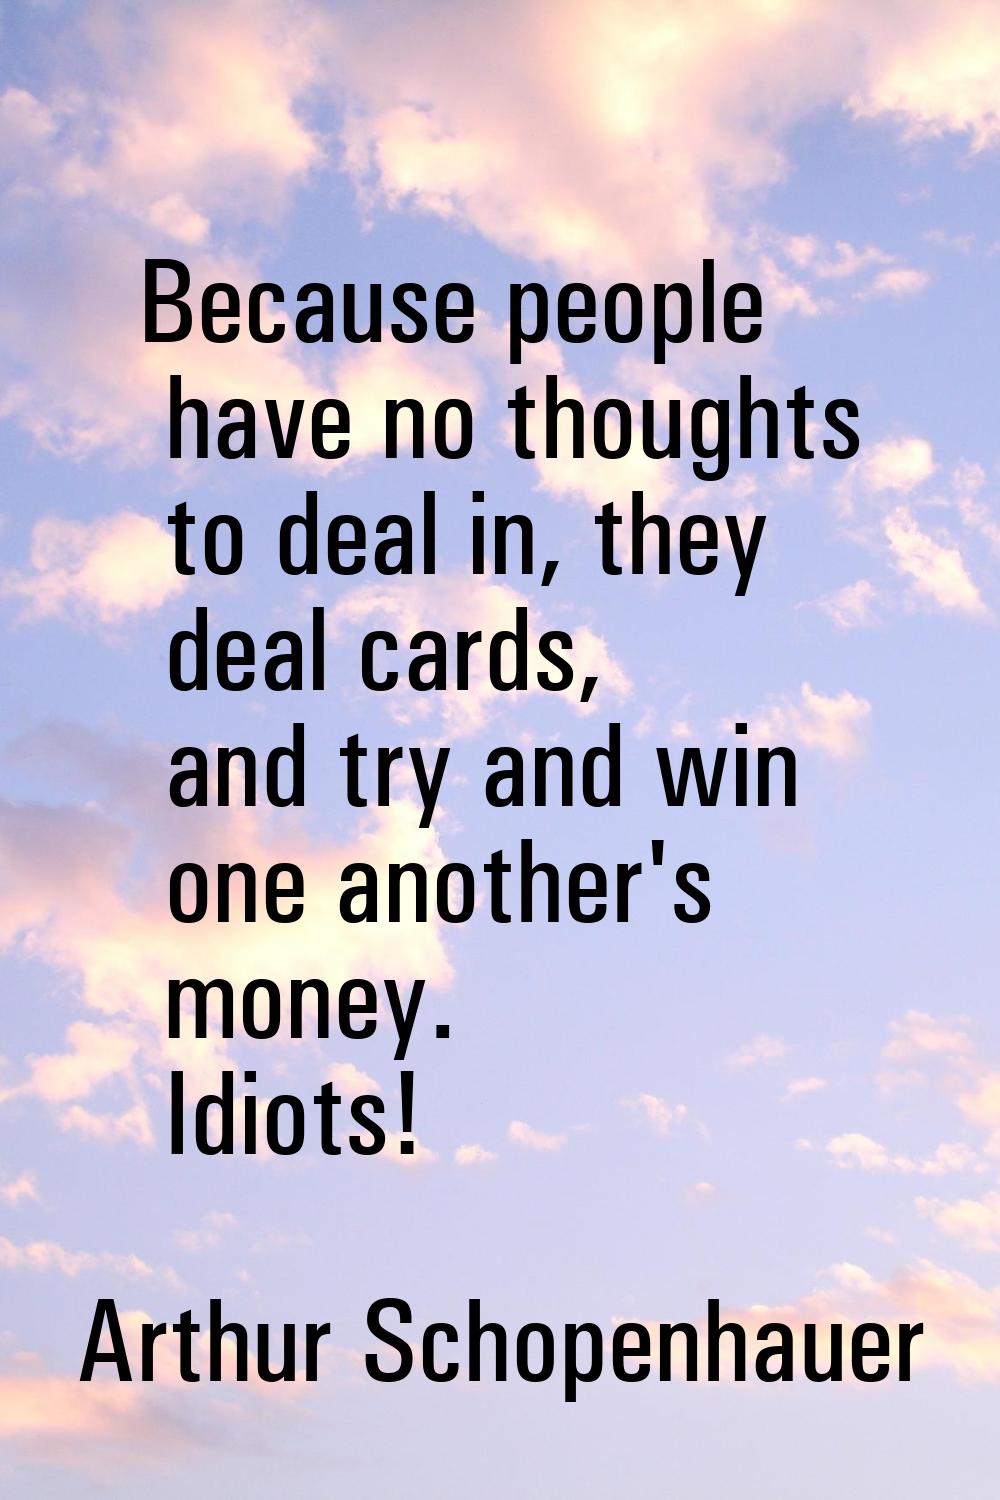 Because people have no thoughts to deal in, they deal cards, and try and win one another's money. I